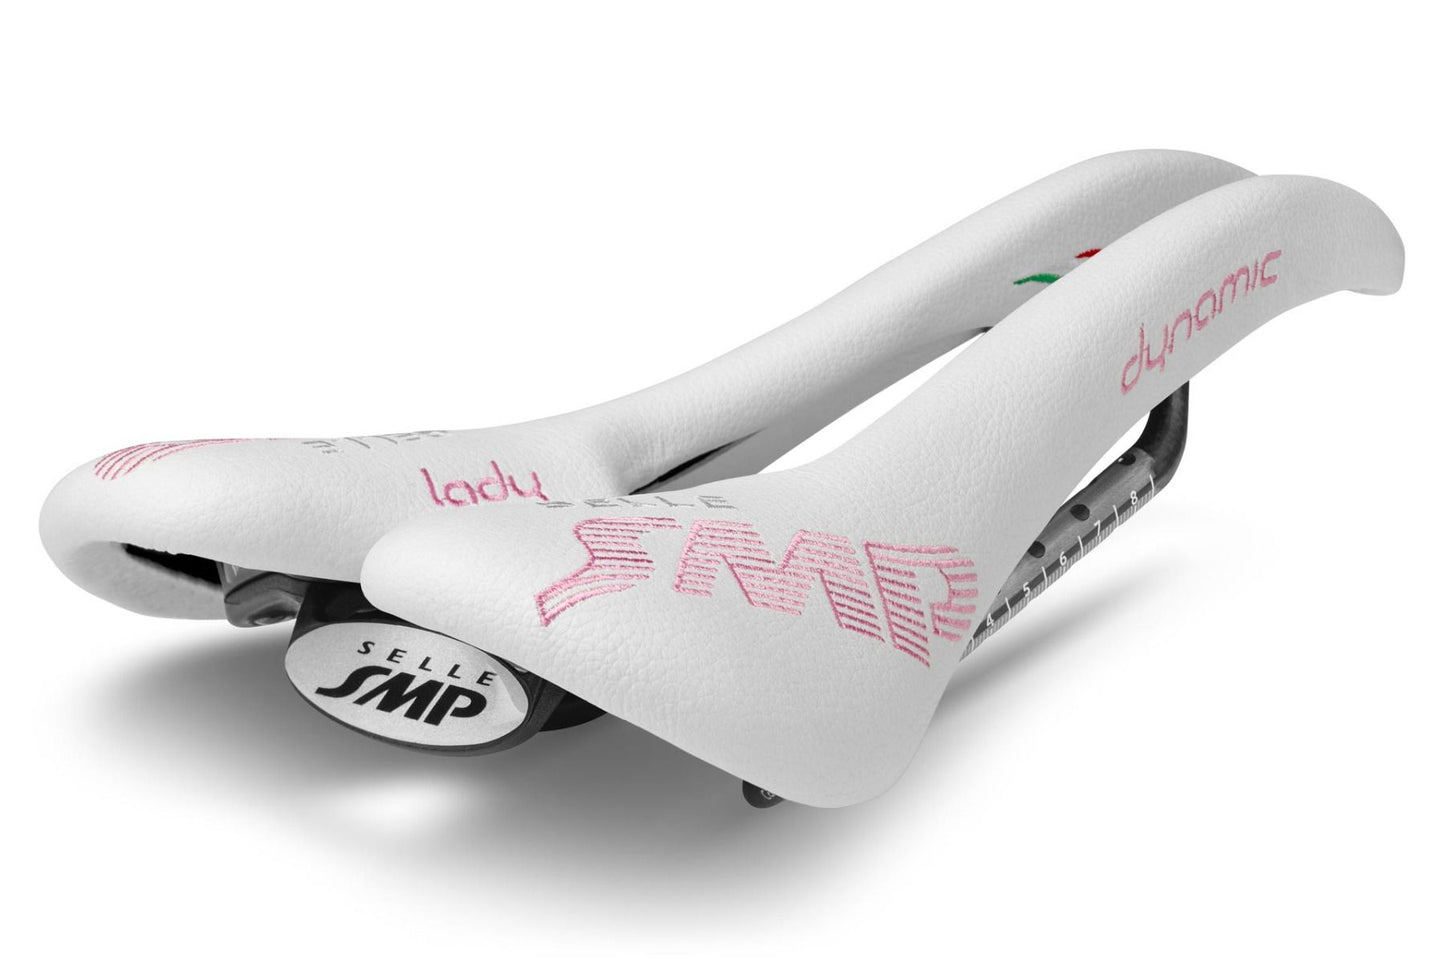 Selle SMP Dynamic Saddle with Carbon Rails (Lady White)